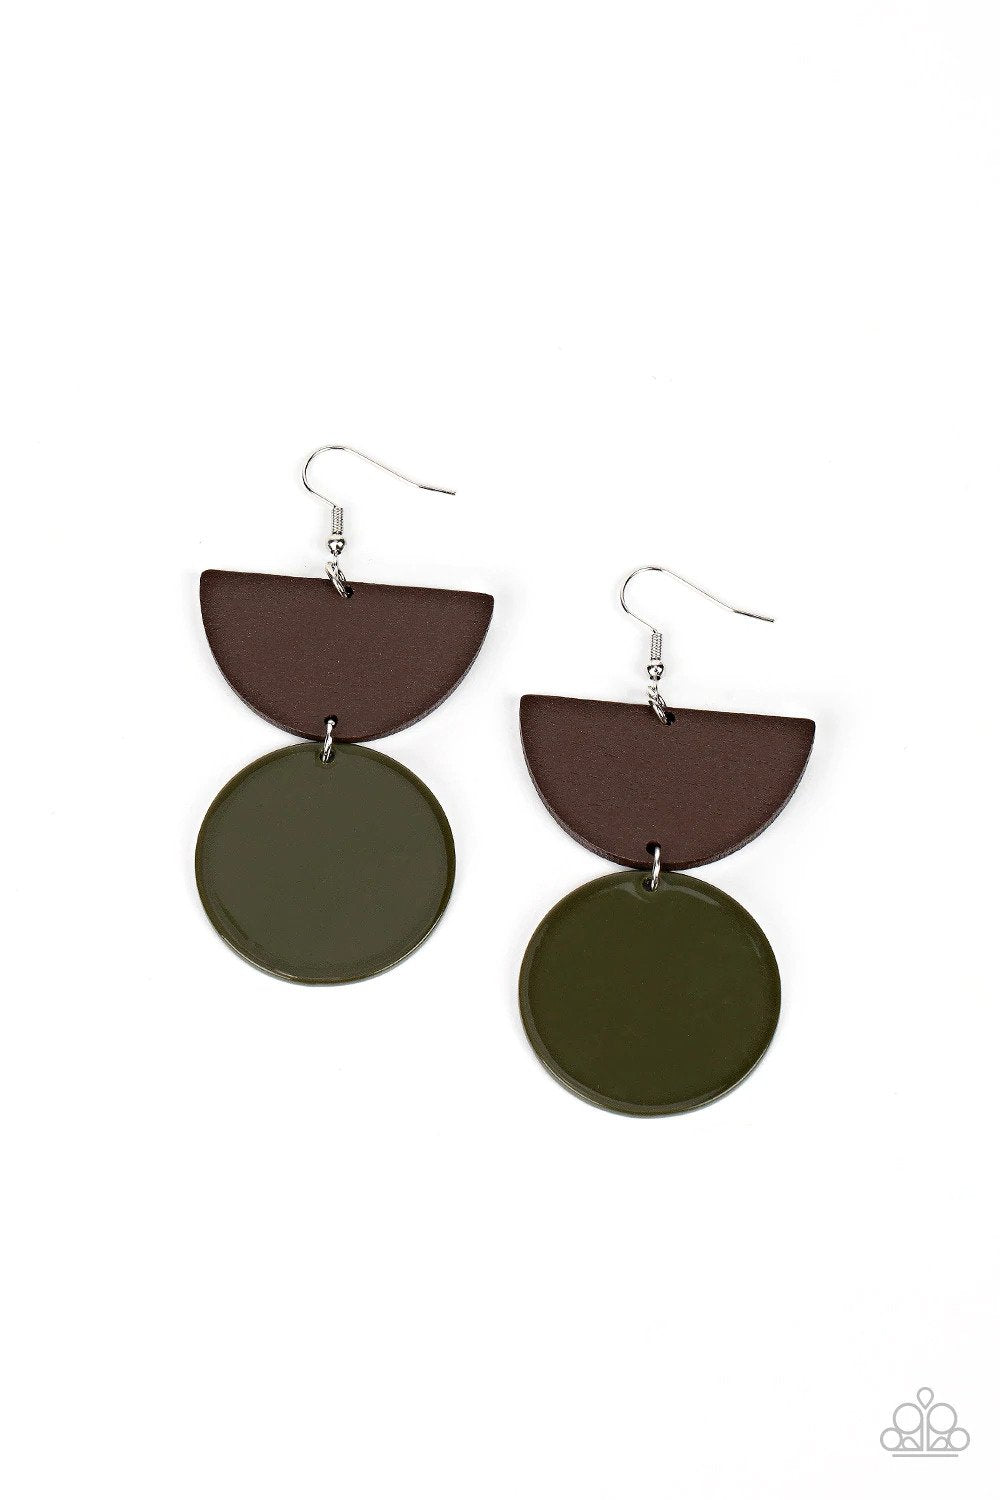 Beach Bistro Green Earrings - Paparazzi Accessories- lightbox - CarasShop.com - $5 Jewelry by Cara Jewels